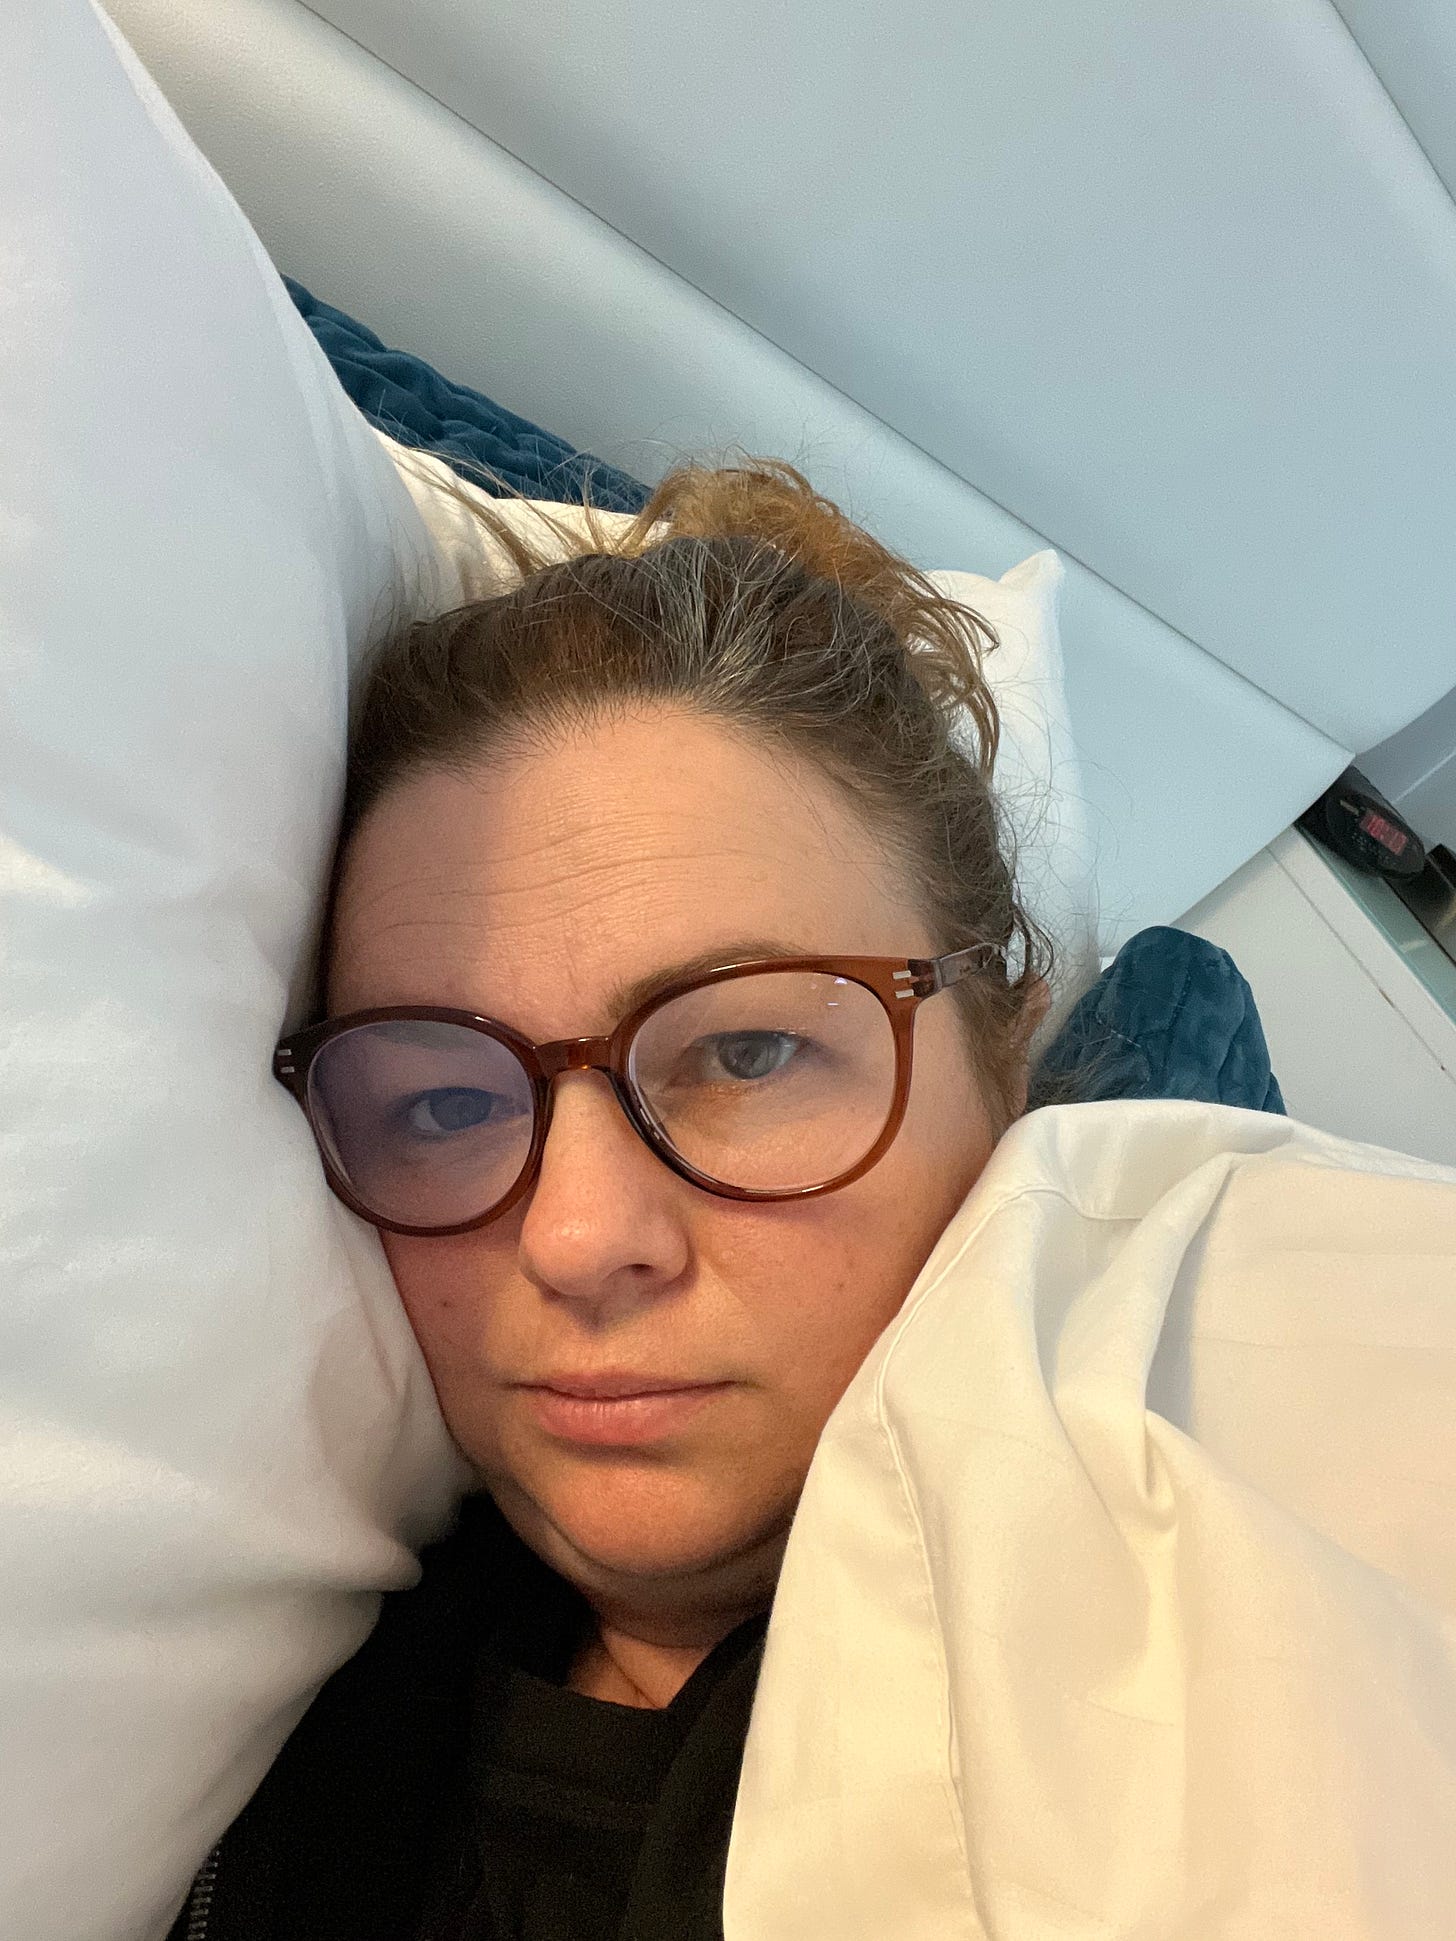 Amber takes a selfie. She is lying on her side in bed, looking into the camera with a tired expression. She wears brown reading glasses and her hair is pulled into a messy bun.